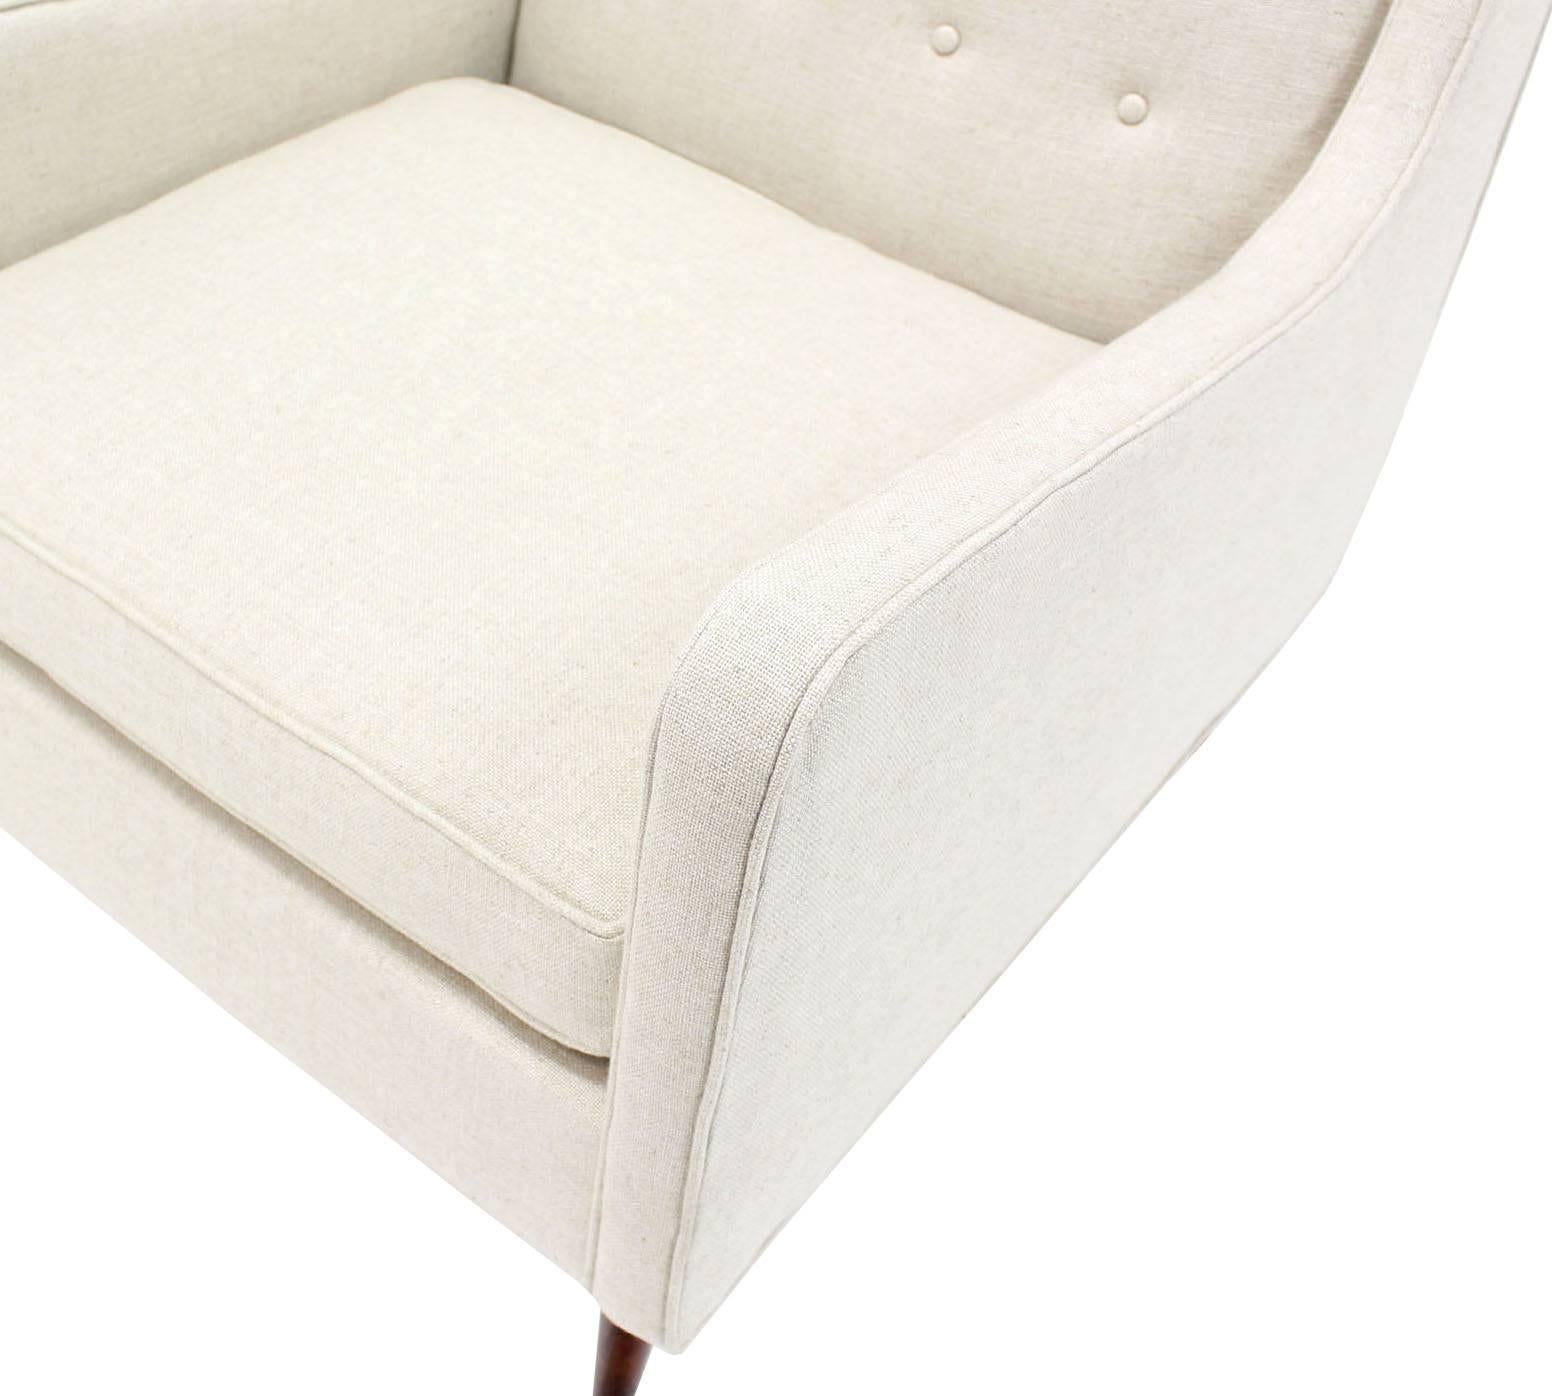 New White Linen Upholstery Mid-Century Modern Lounge Chair In Excellent Condition For Sale In Rockaway, NJ